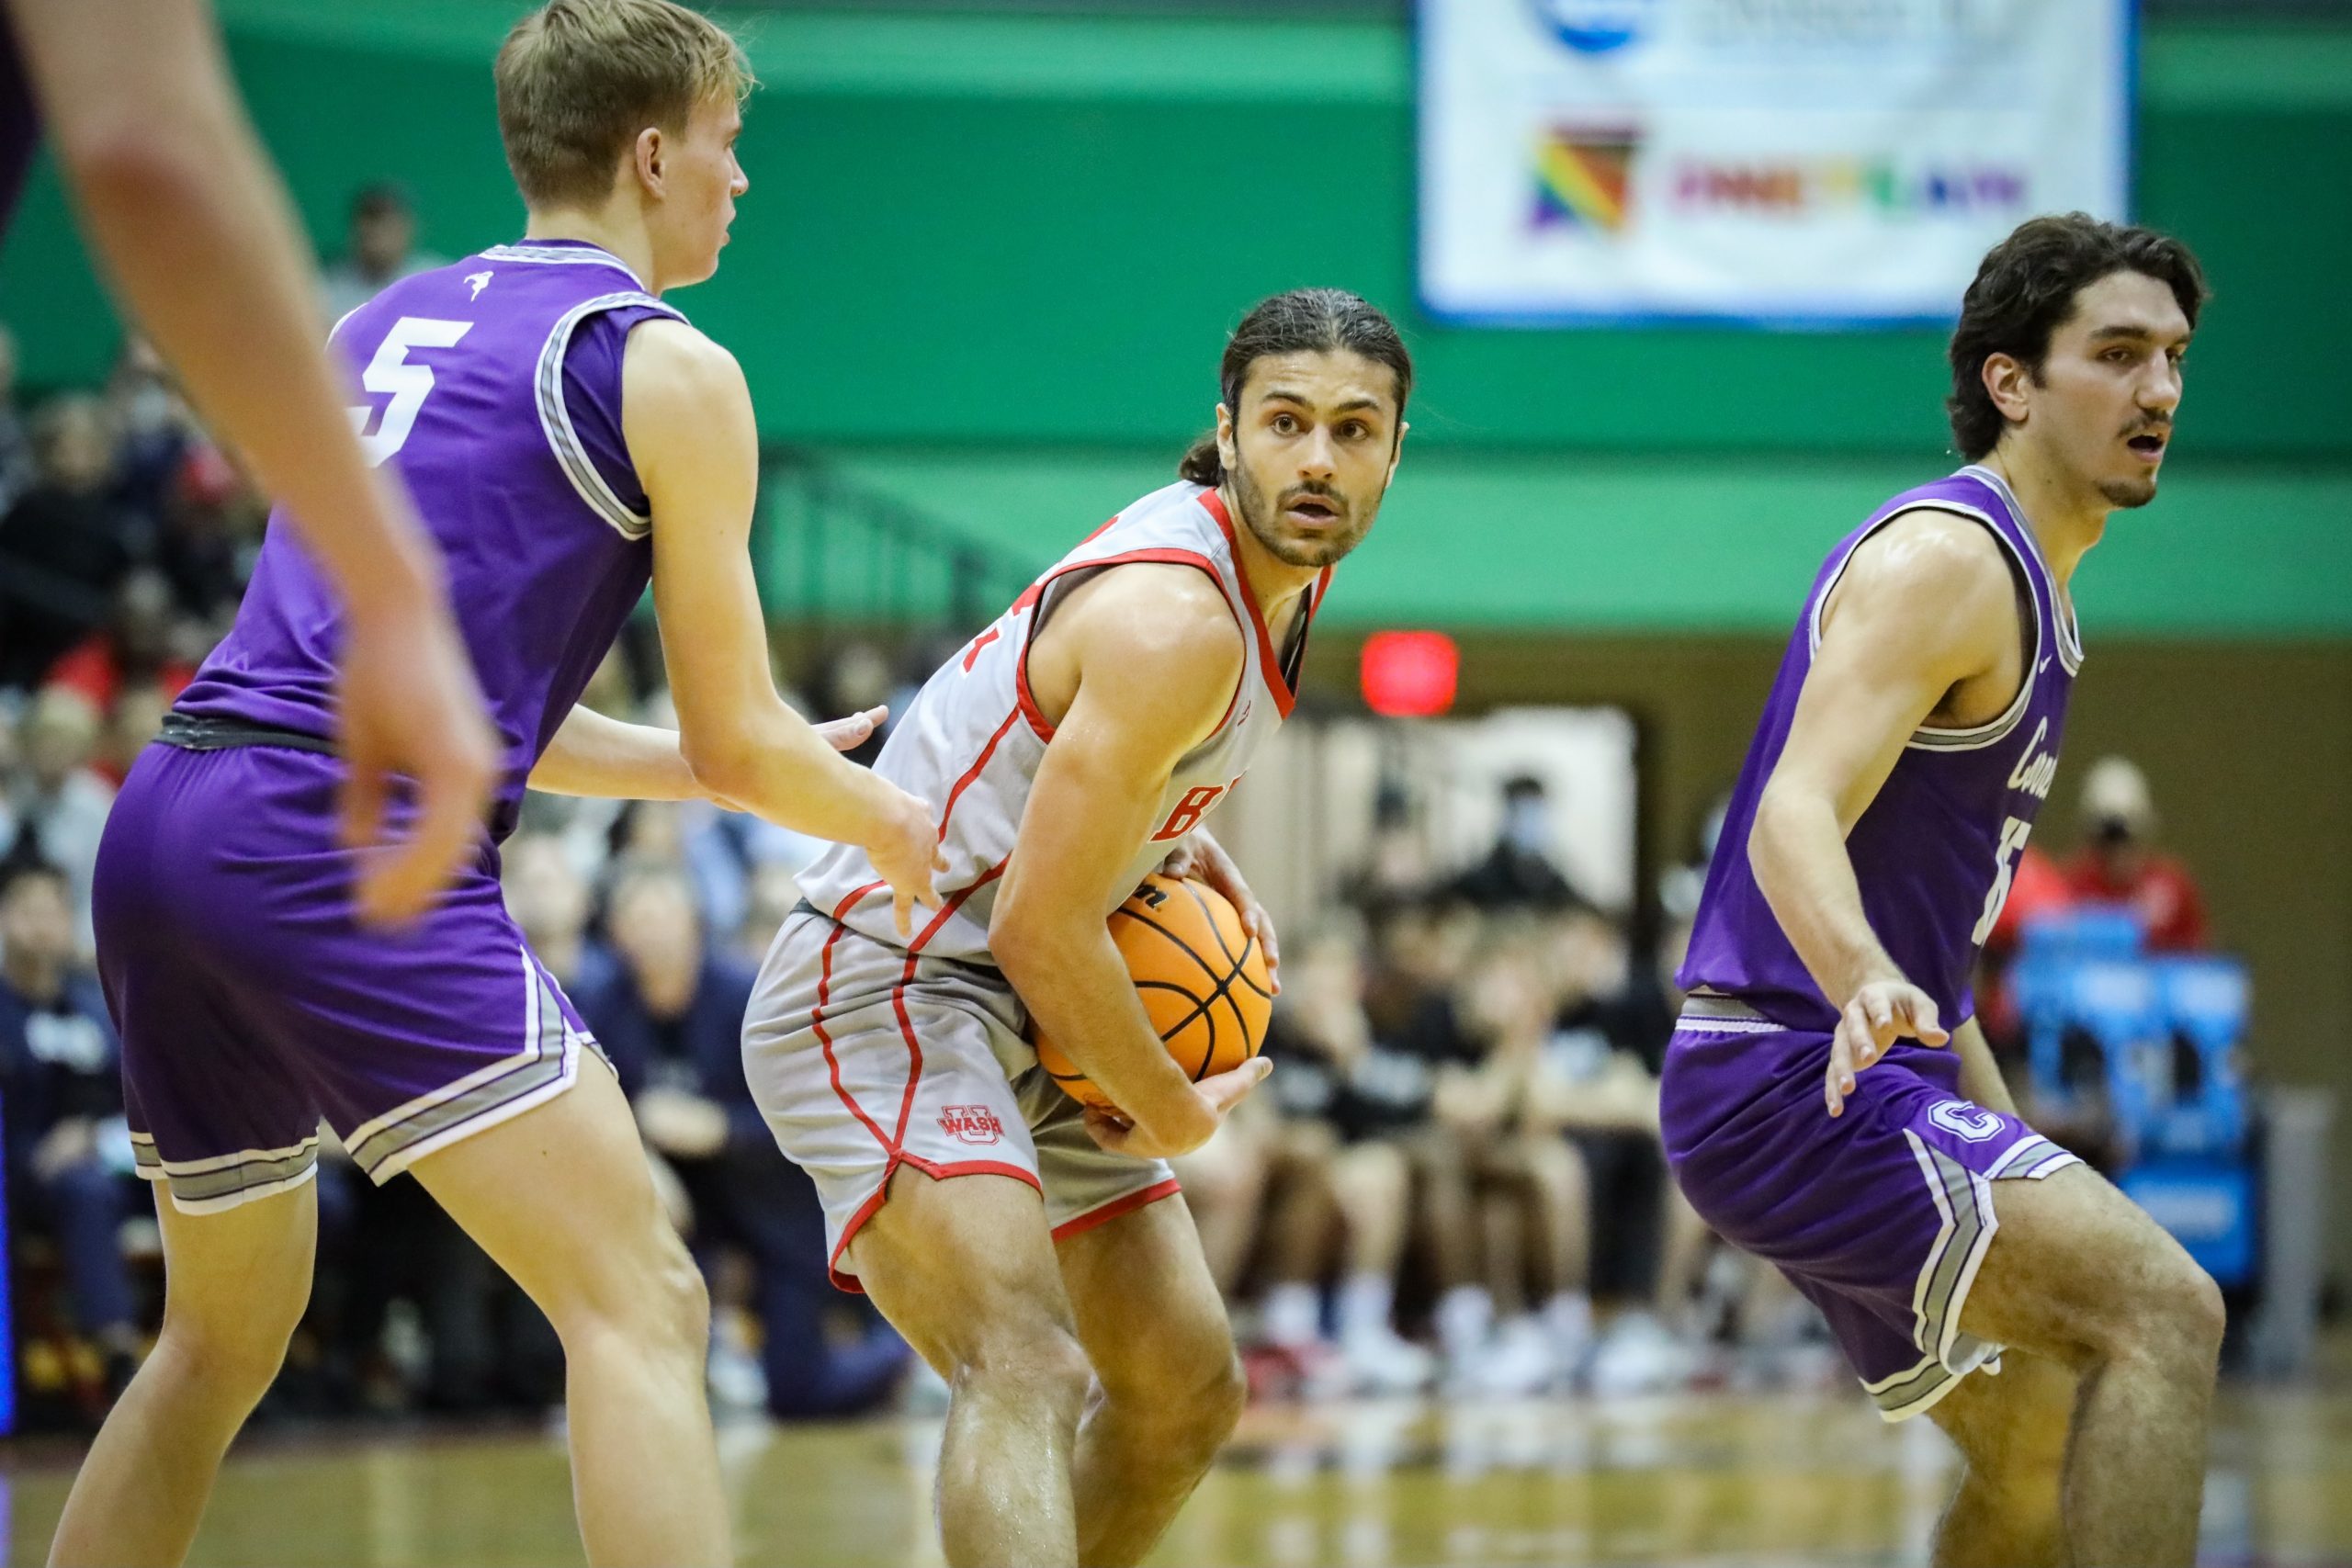 A basketball player in a gray and red jersey holds a ball in two hands close to his stomach to protect it from a defender, who wears a purple jersey and the number 5. Another defender in purple stands on the right side.